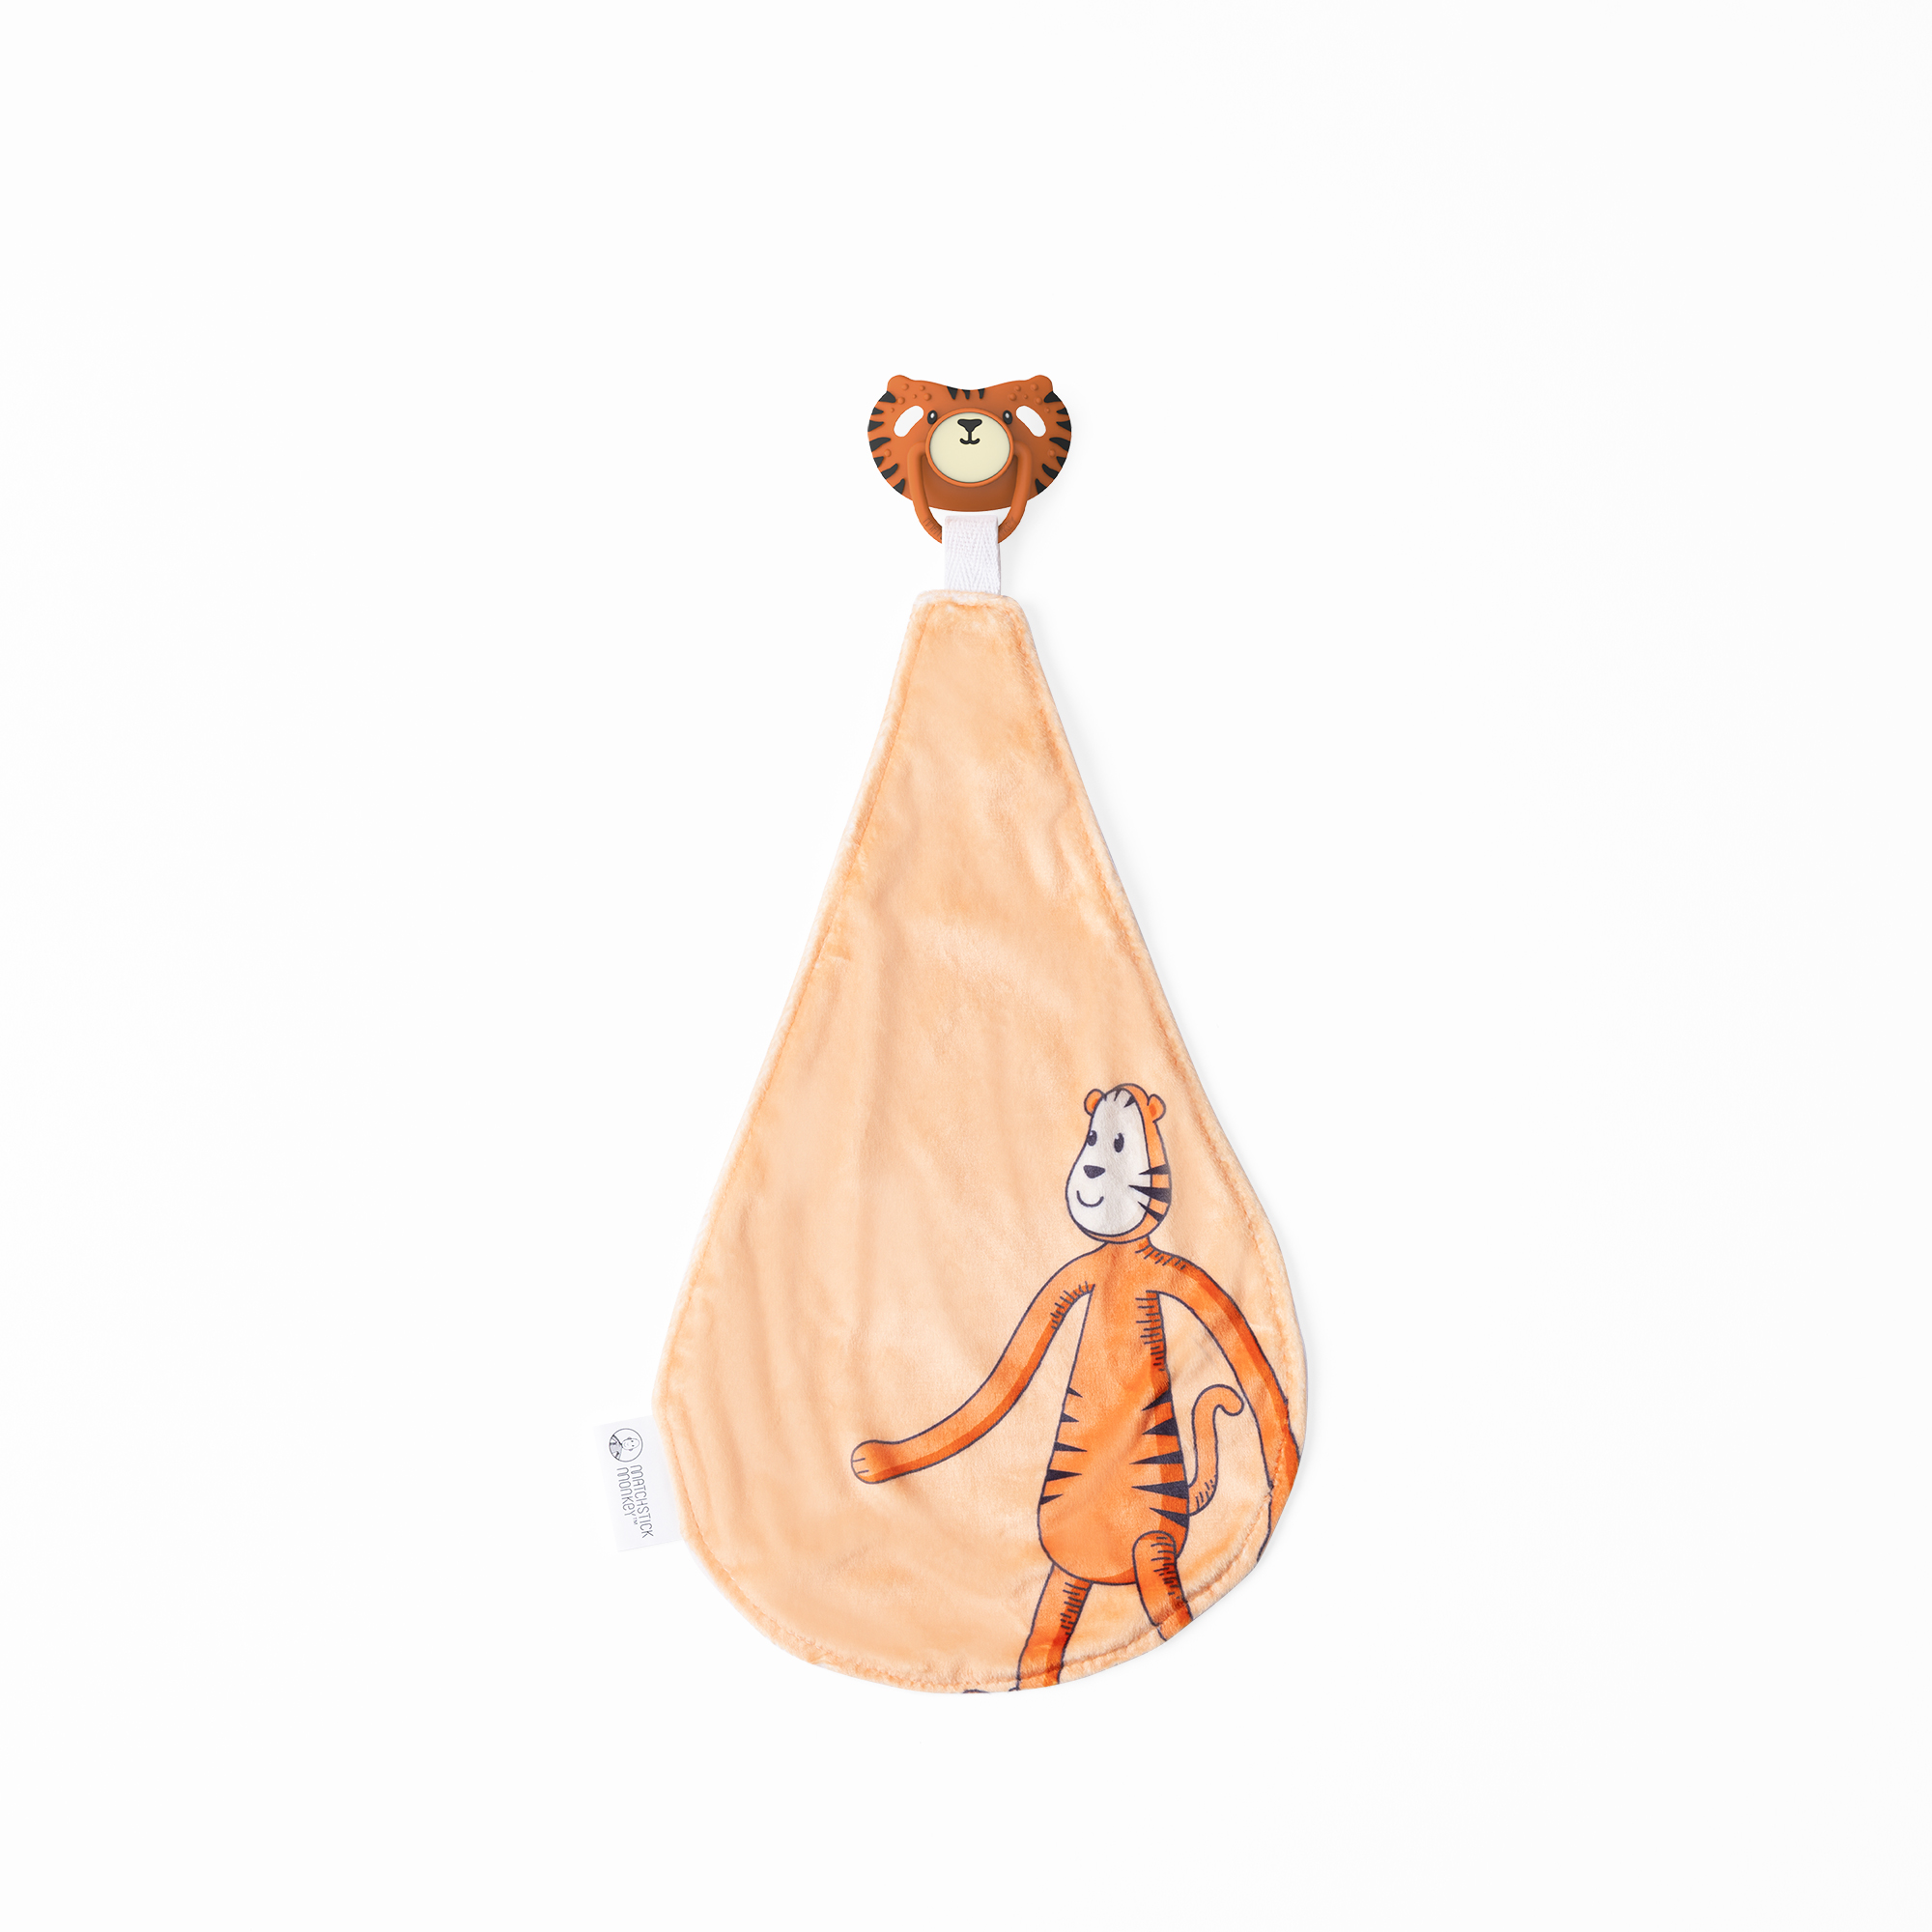 Matchstick Monkey All in 1 Soother + Comforter